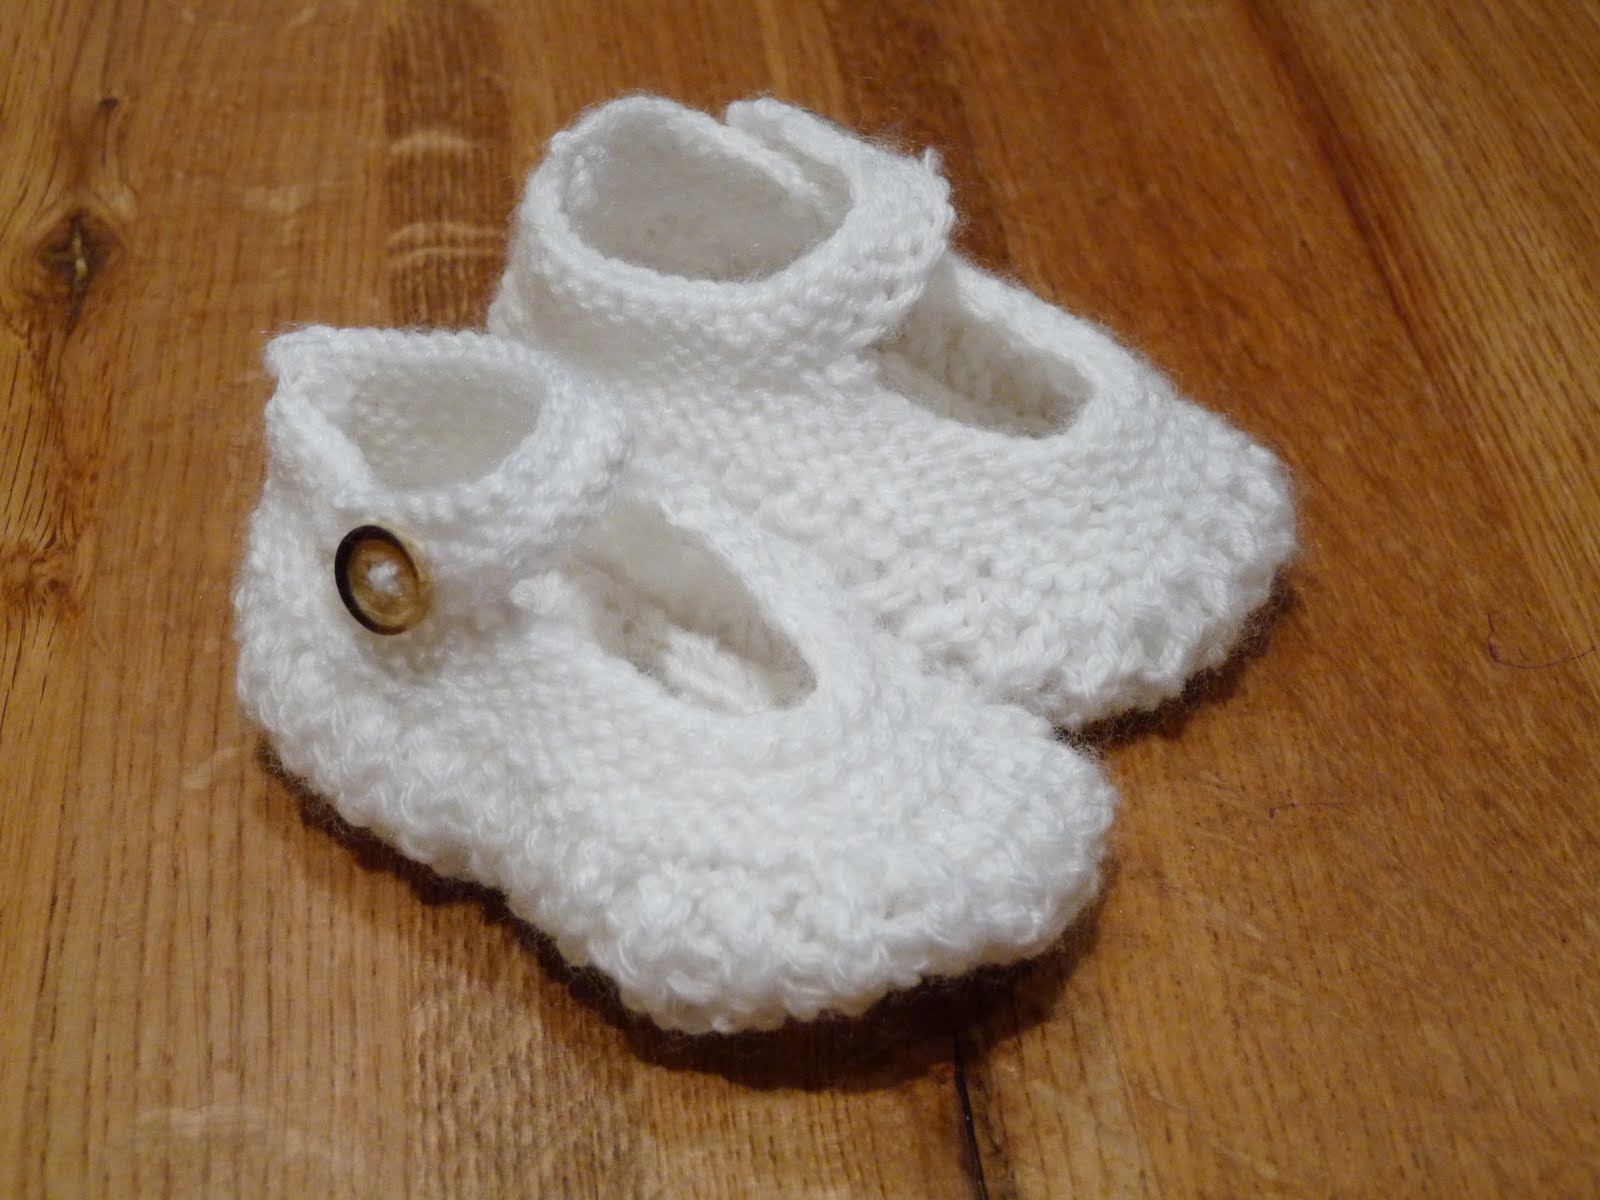 Our Homemade Home: Knitted Baby Shoes